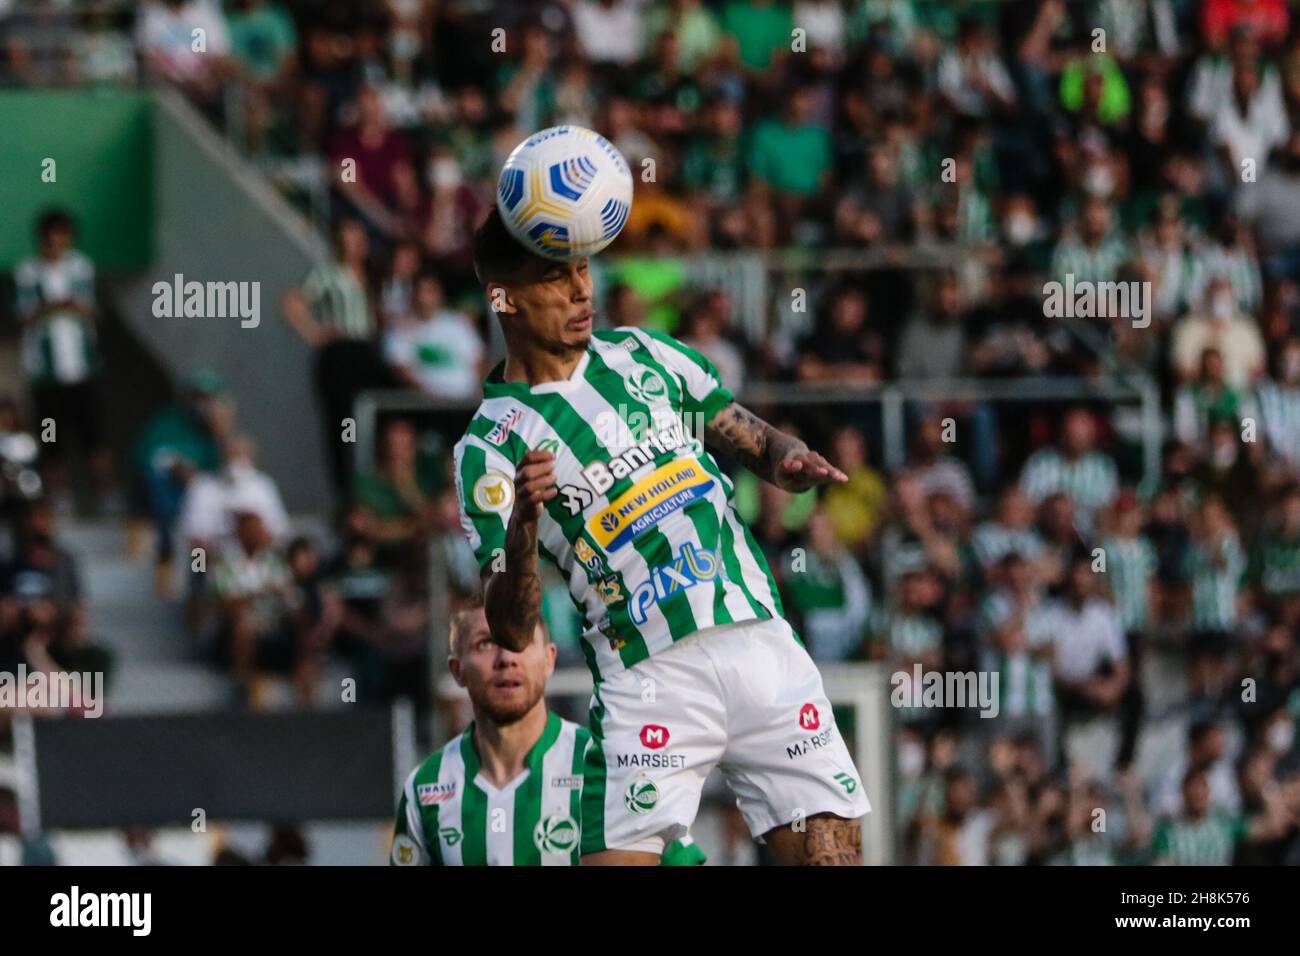 RS - Caxias do Sul - 11/30/2021 - BRASILEIRAO TO 2021, YOUTH X BRAGANTINO. Vitor Mendes, Juventude player, in a match against Juventude, at Alfredo Jaconi Stadium, for the 2021 Brazilian Championship A. Photo: Luiz Erbes/AGIF/Sipa USA Stock Photo